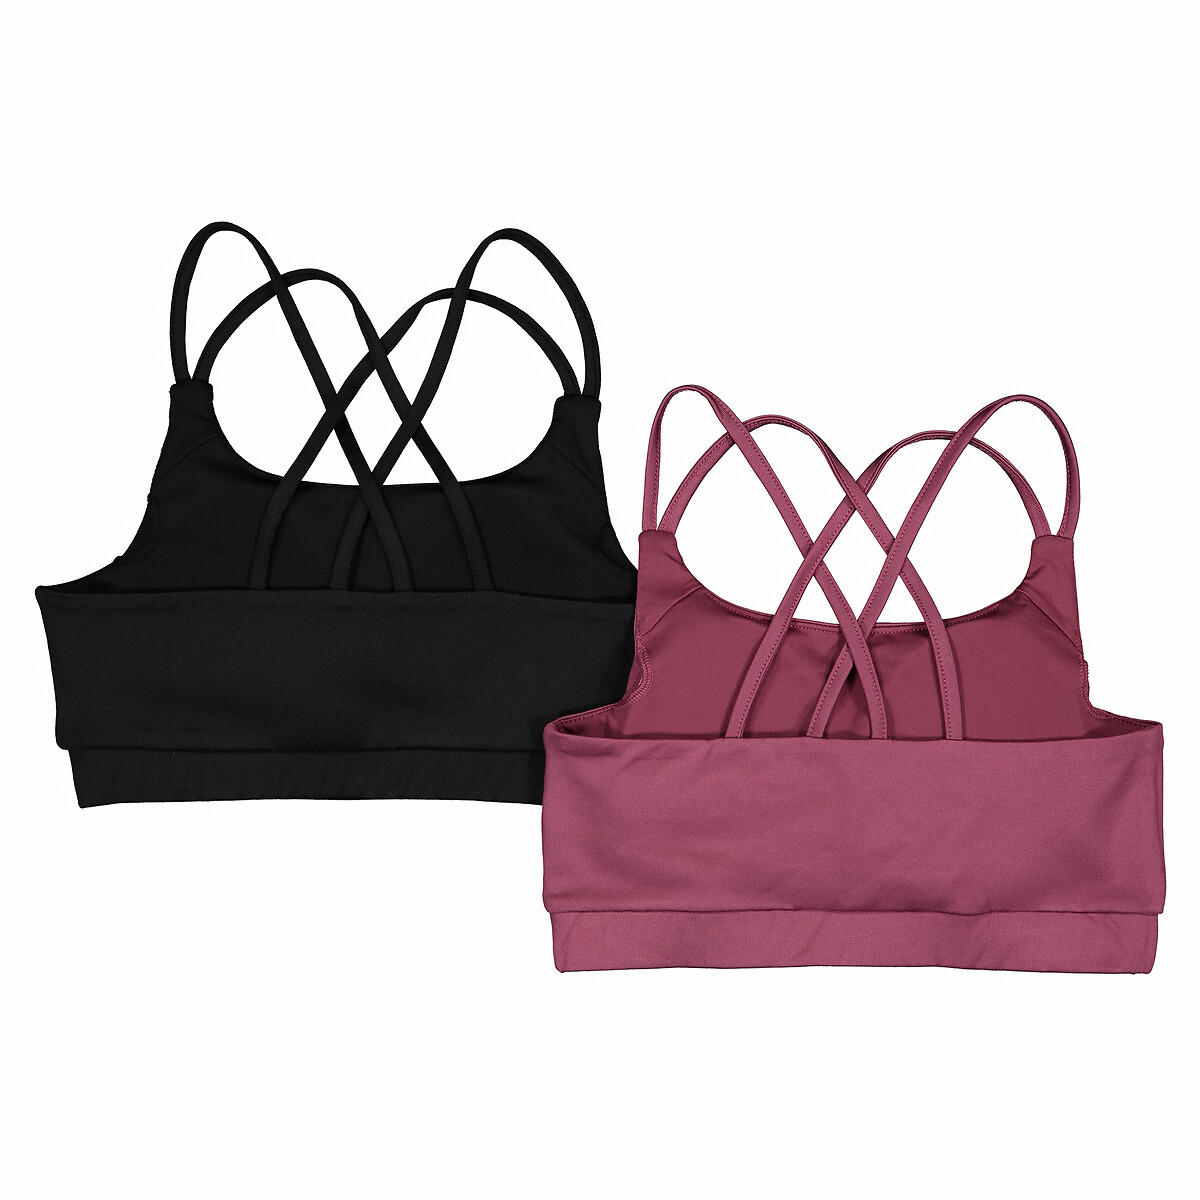 Pack of 2 sports bras in cotton, 10-16 years, black + purple, Dim